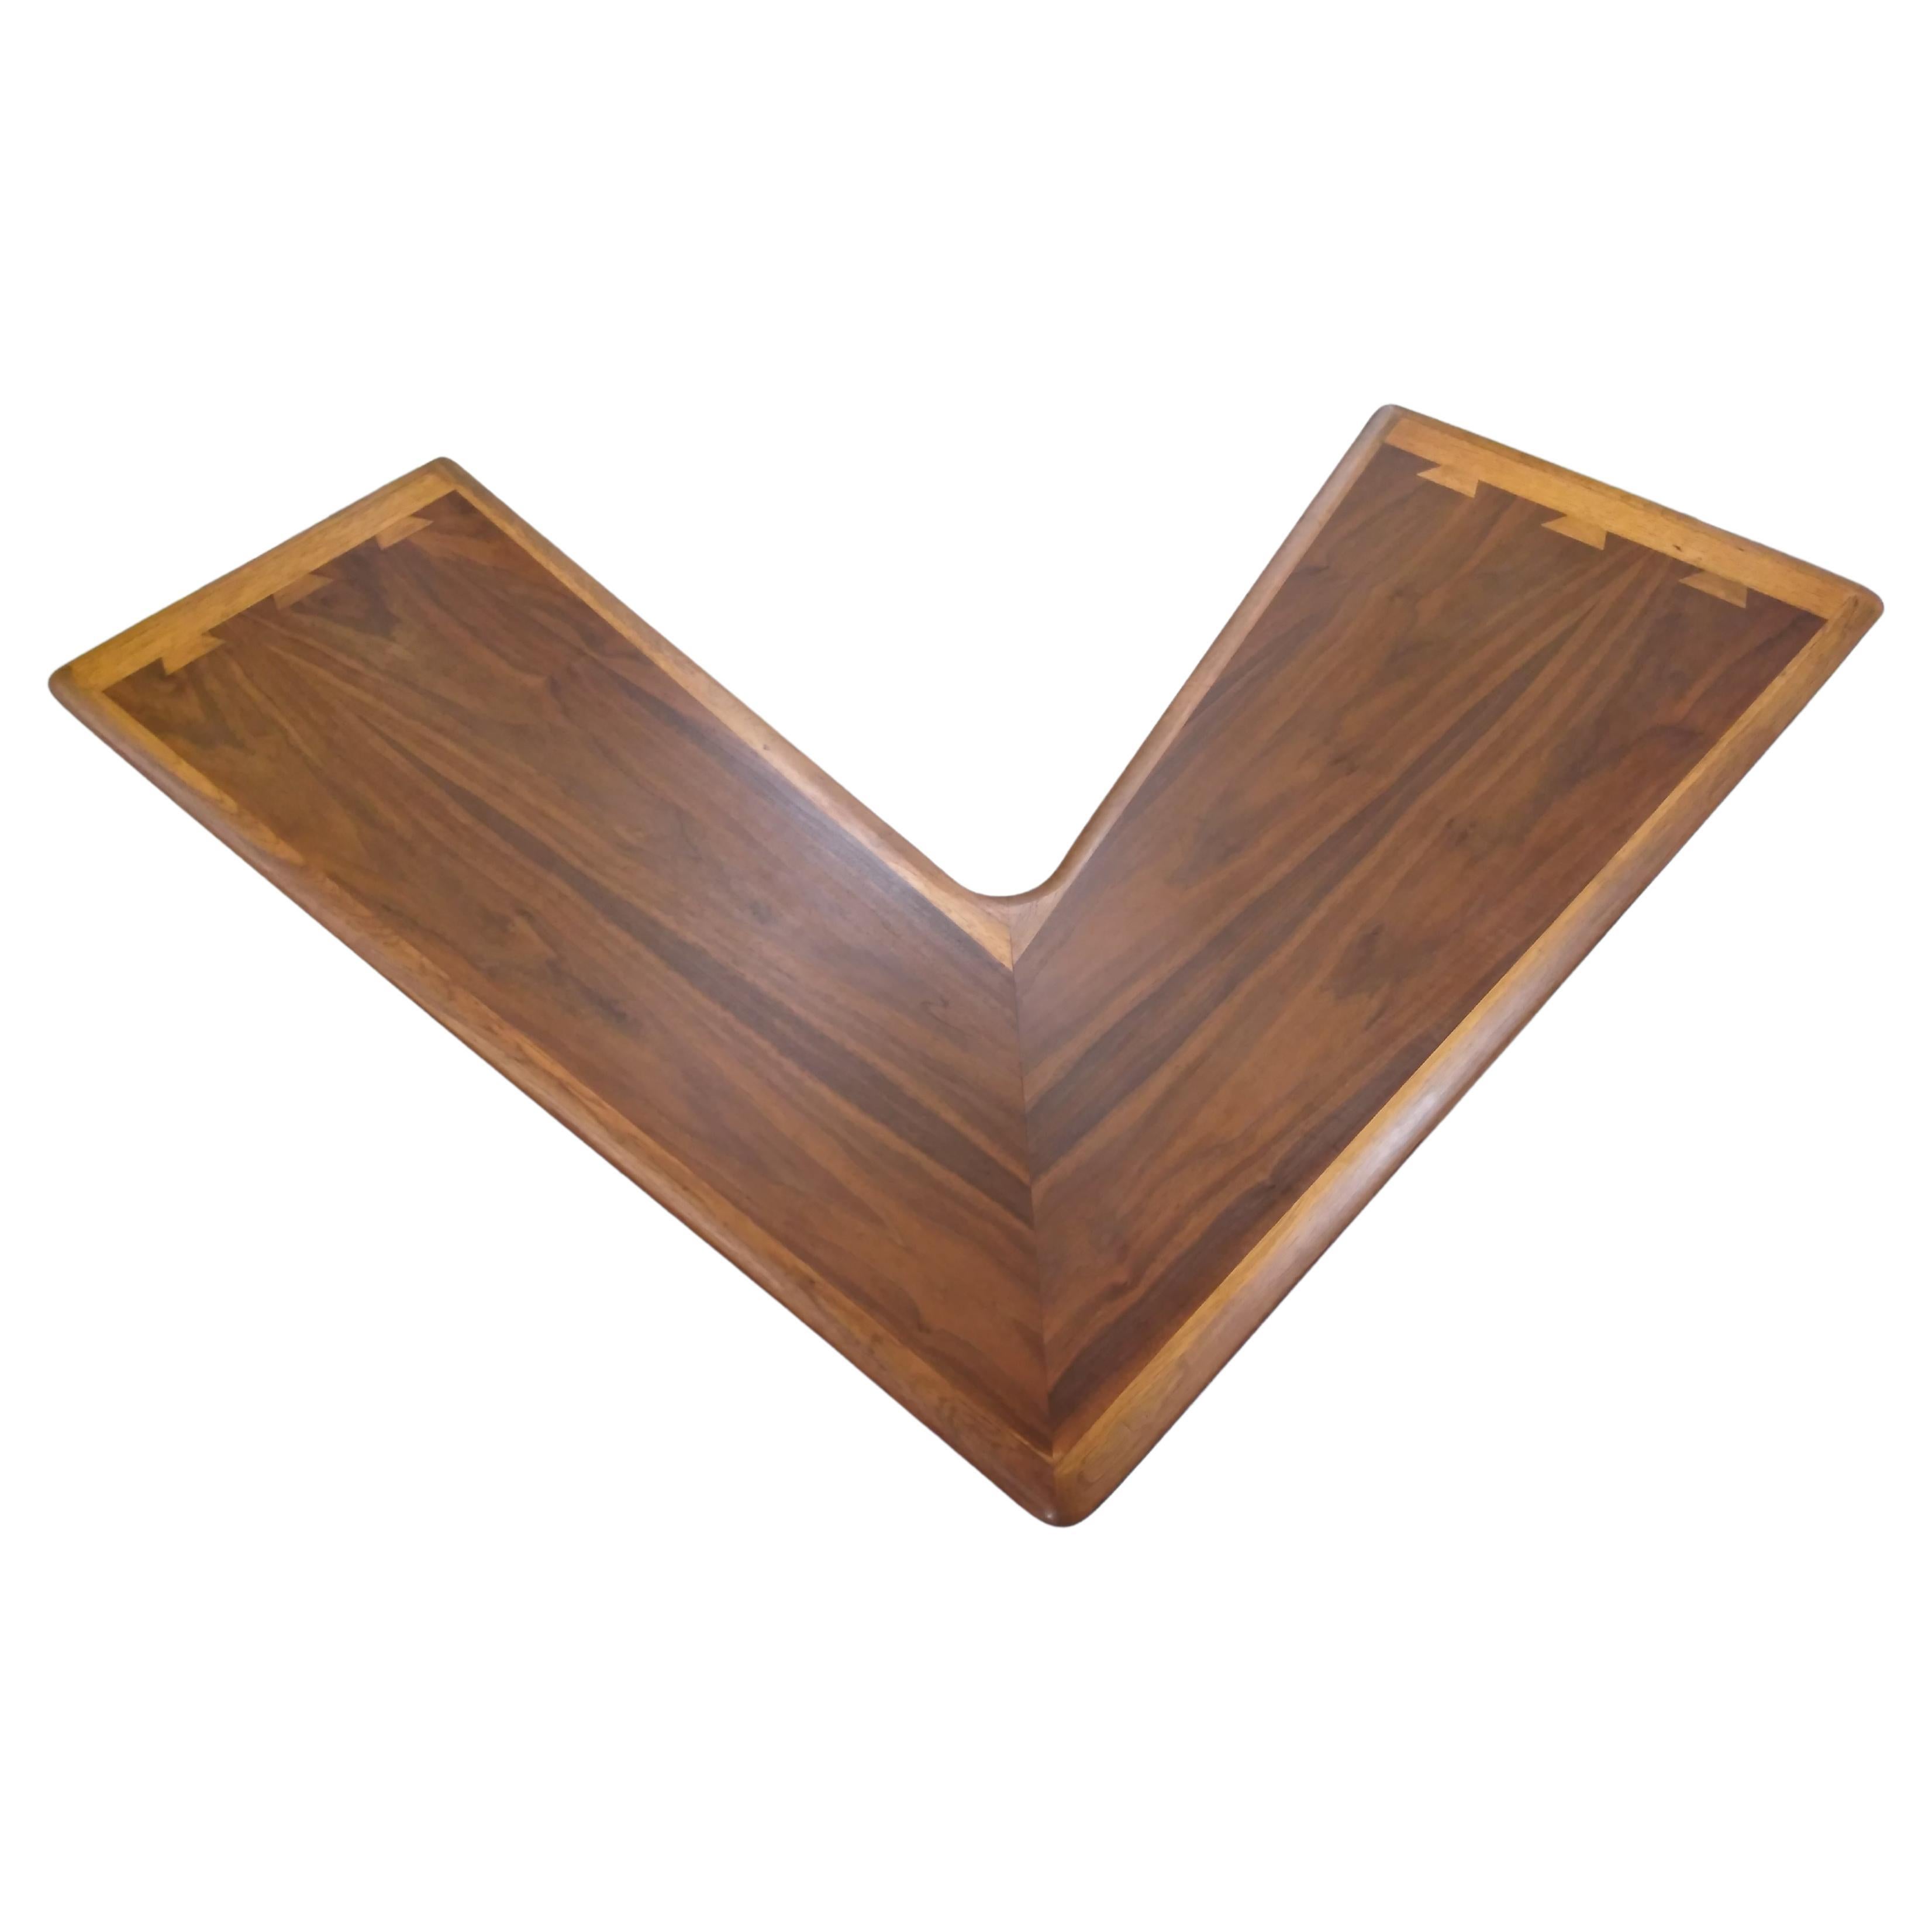 Lane Acclaim mid century walnut DoveTail boomerang coffee table

Classic design with dovetail ends by Andre Bus for Lane Acclaim. The table features walnut and ashwood grain.
Tapered legs with ebonized feet.
   